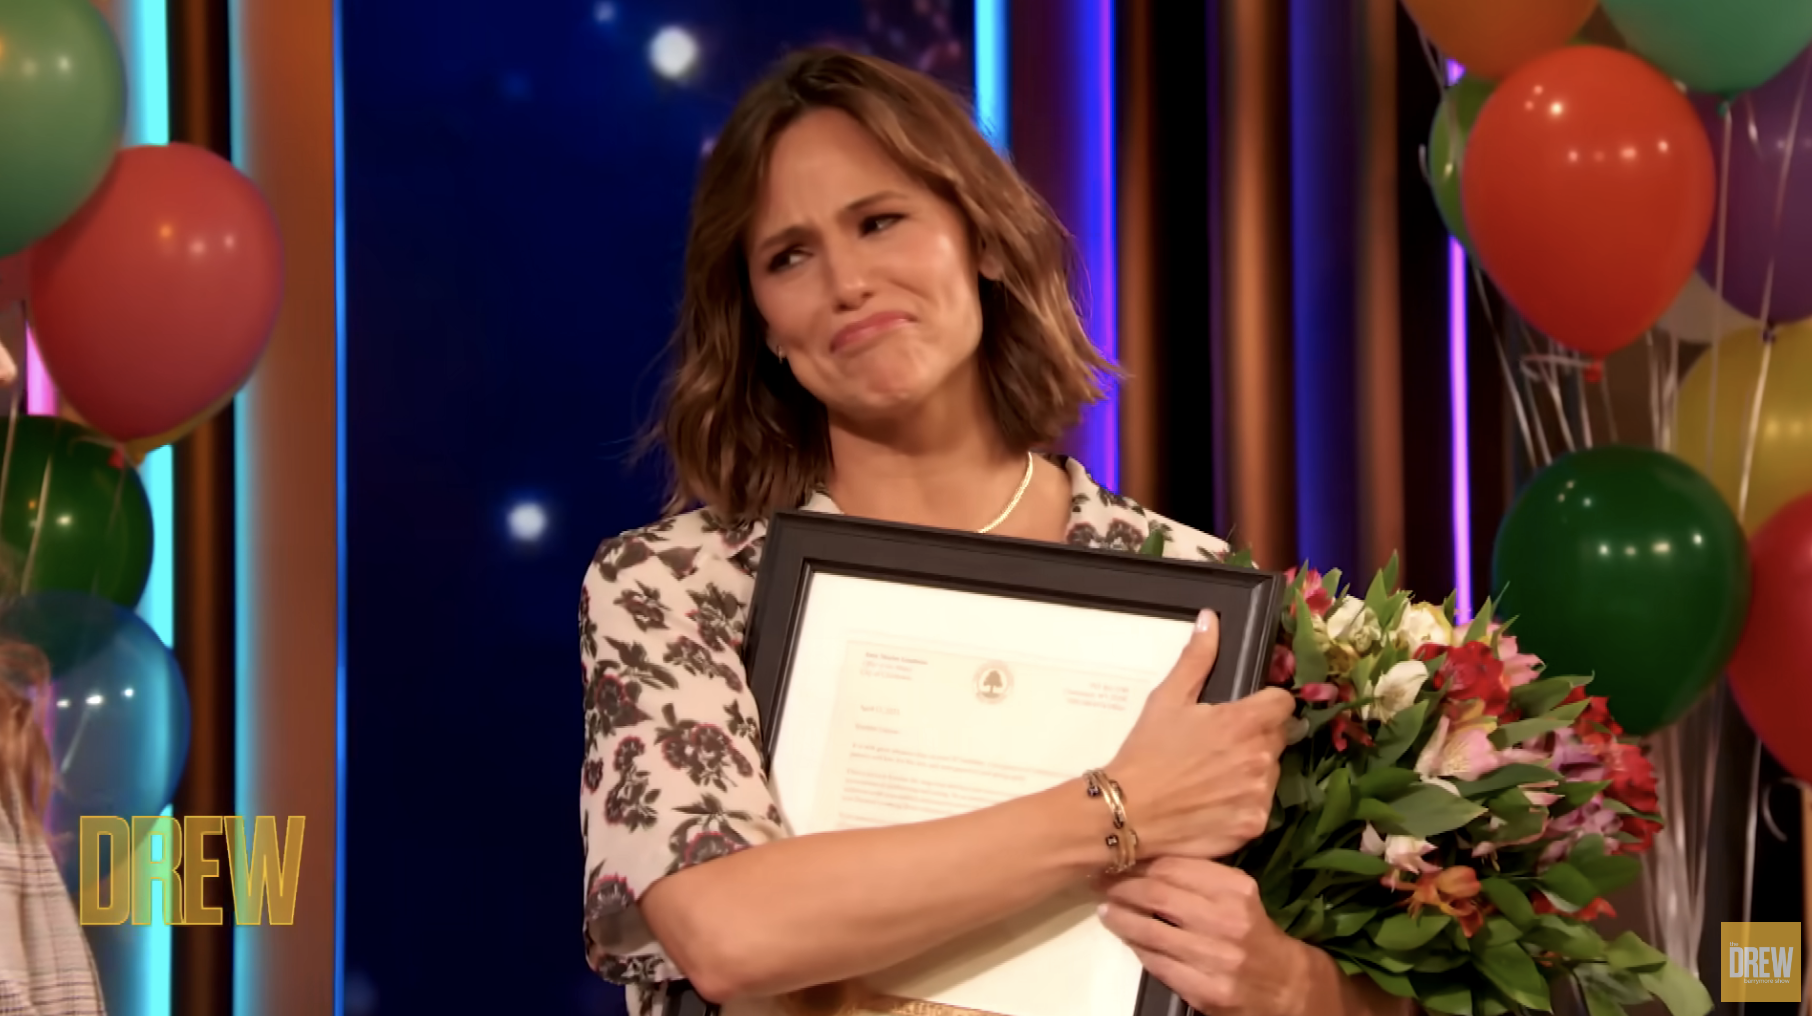 Closeup of Jennifer Garner holding a bouquet of flowers and a plaque from Drew